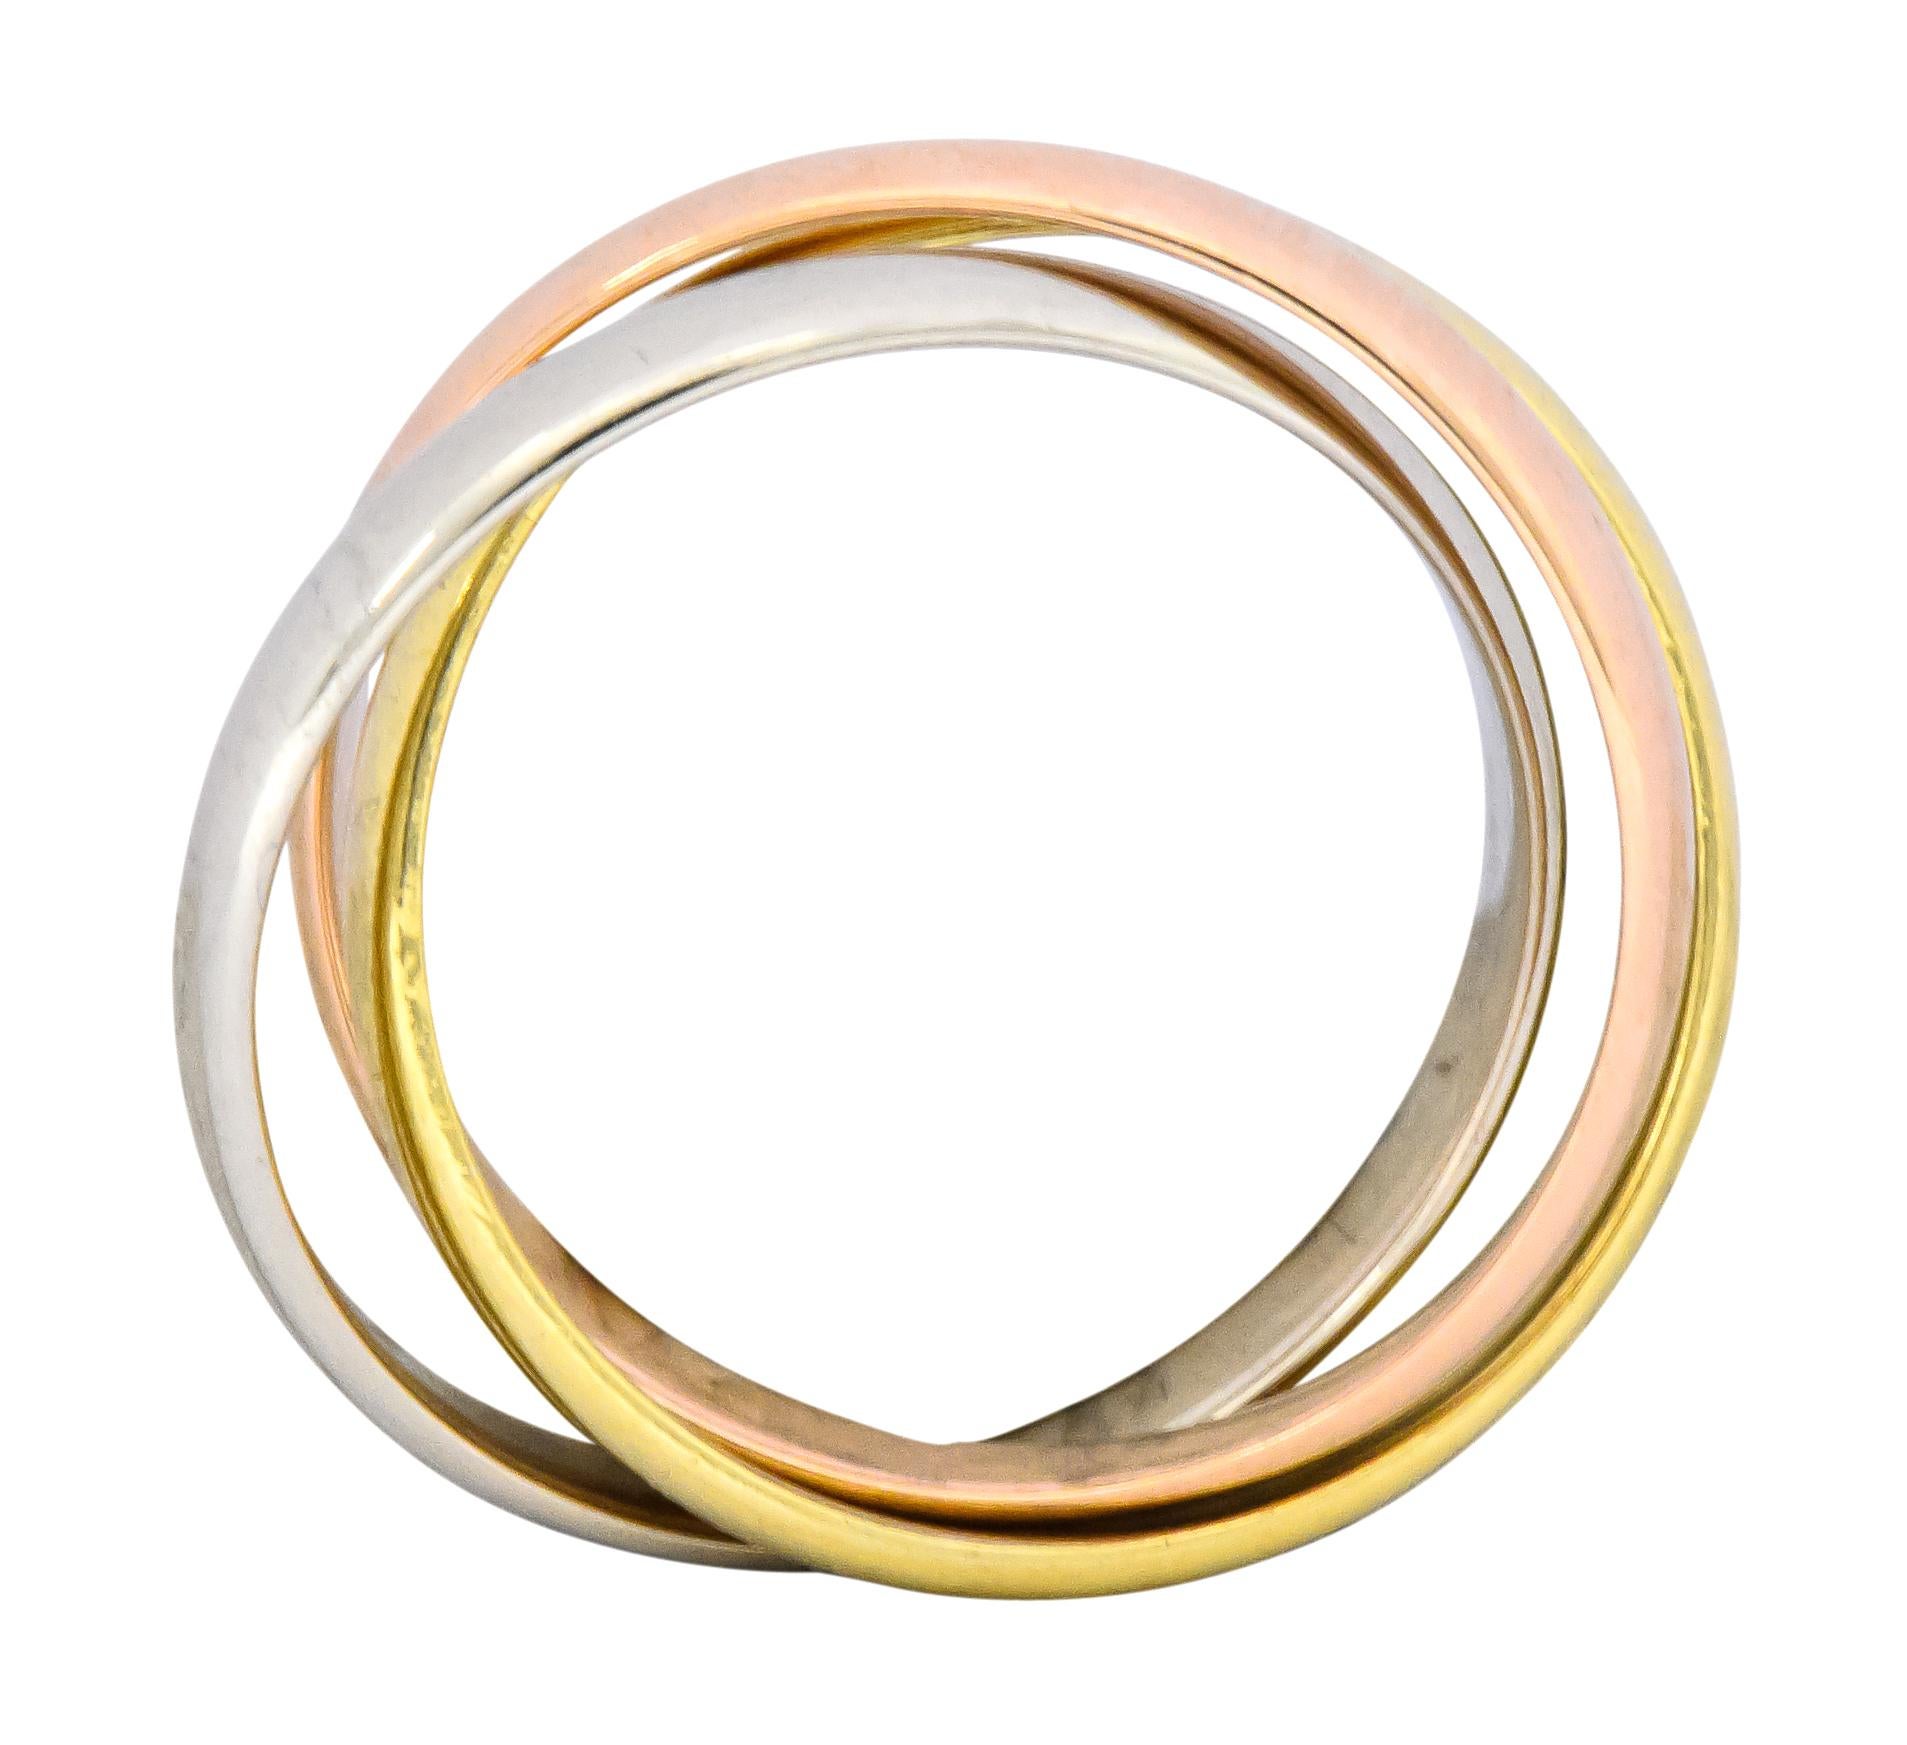 Cartier 18 Karat Tri-Colored Gold Unisex Trinity Band Ring 1